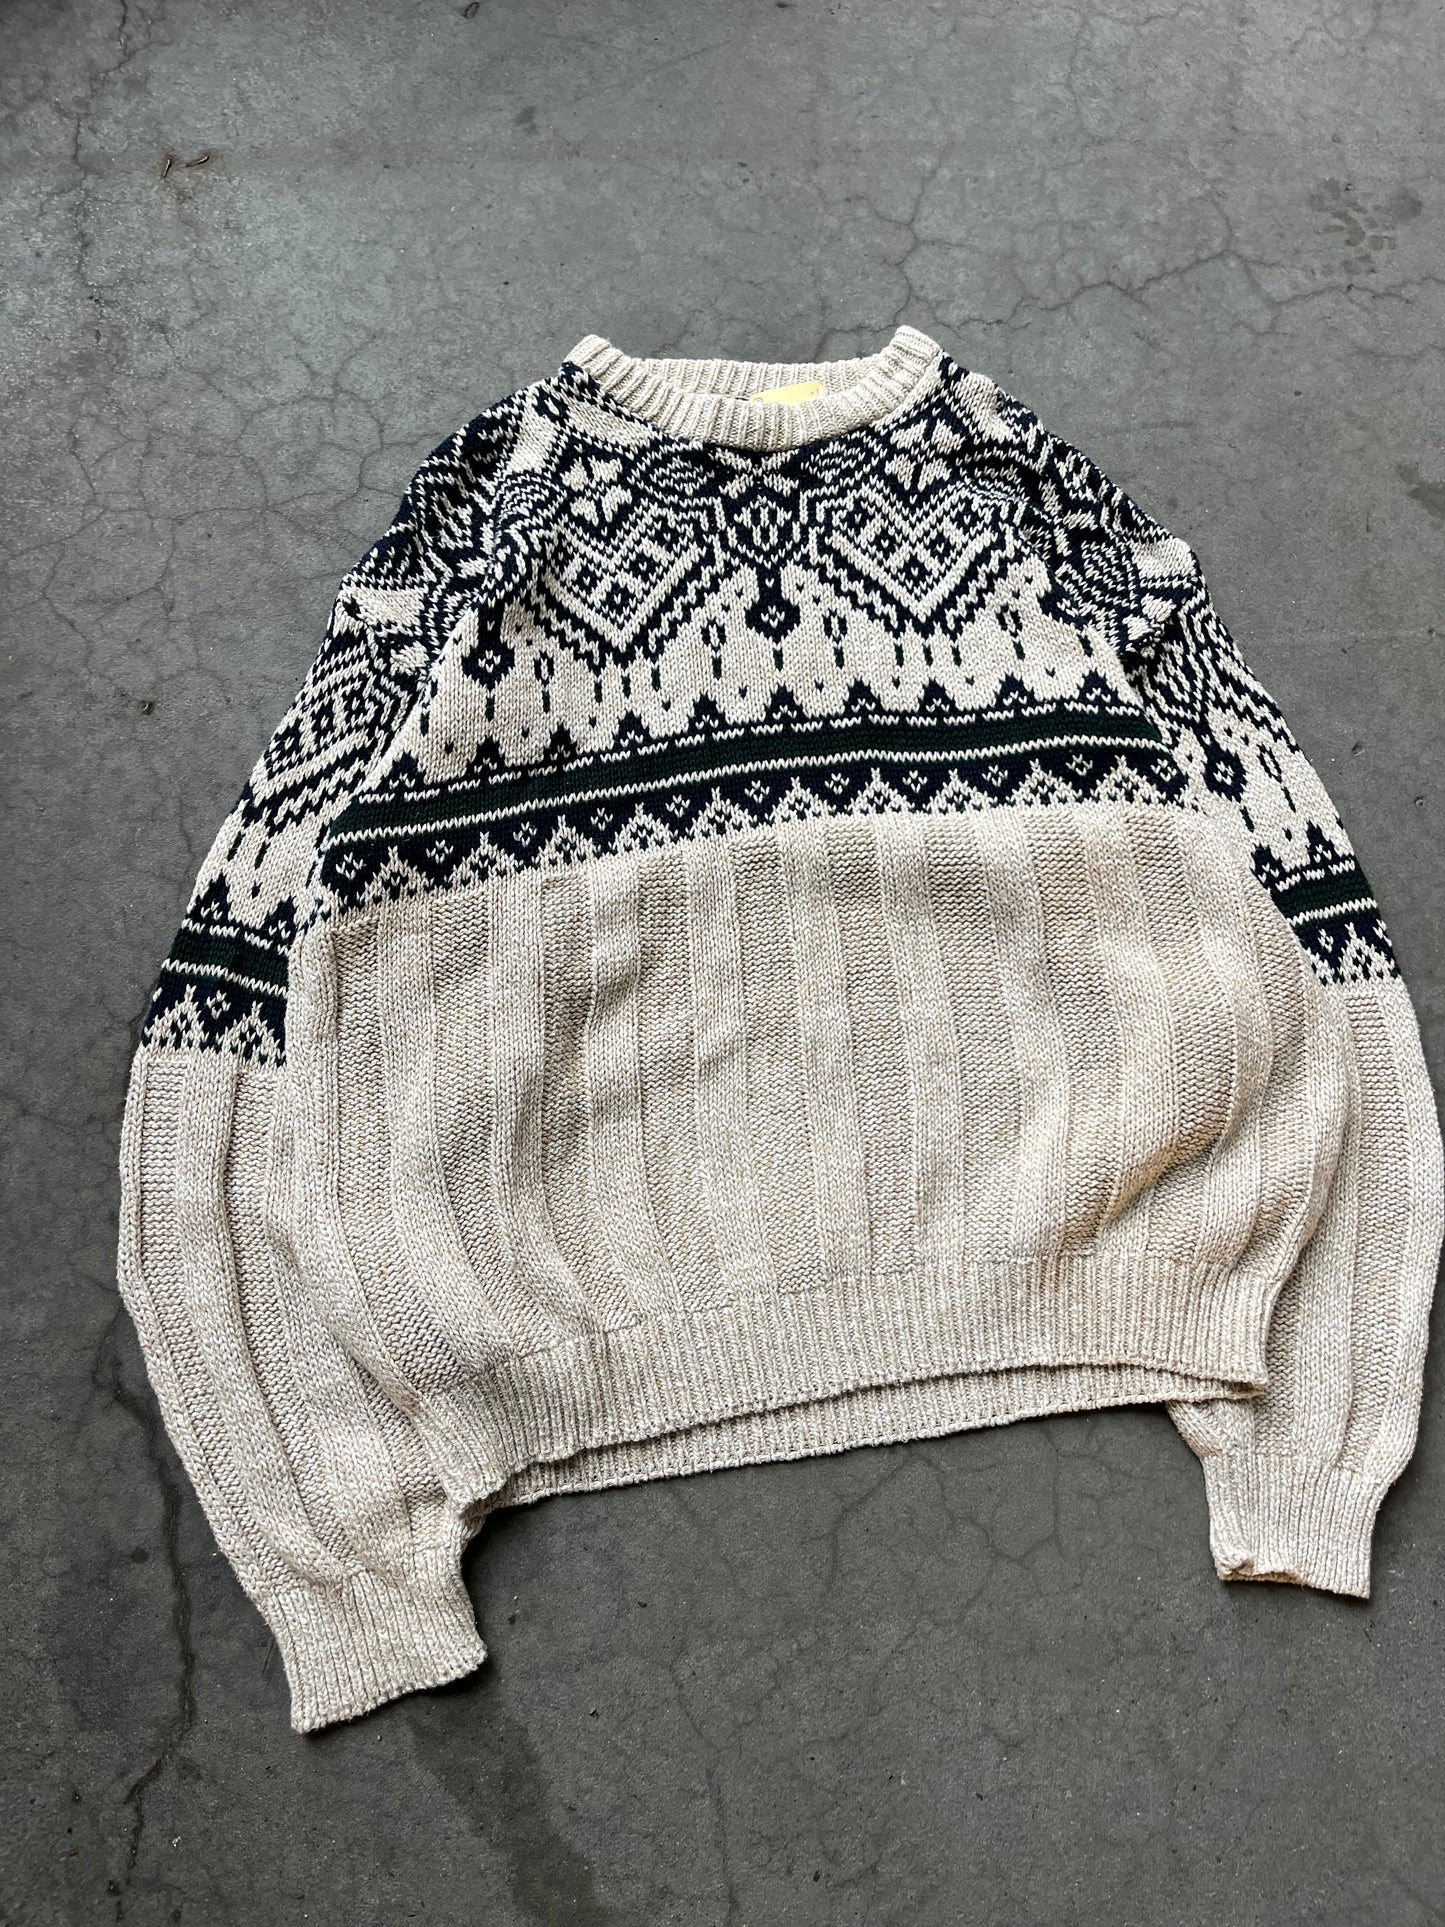 (L) 90s cotton Knitwear abstract